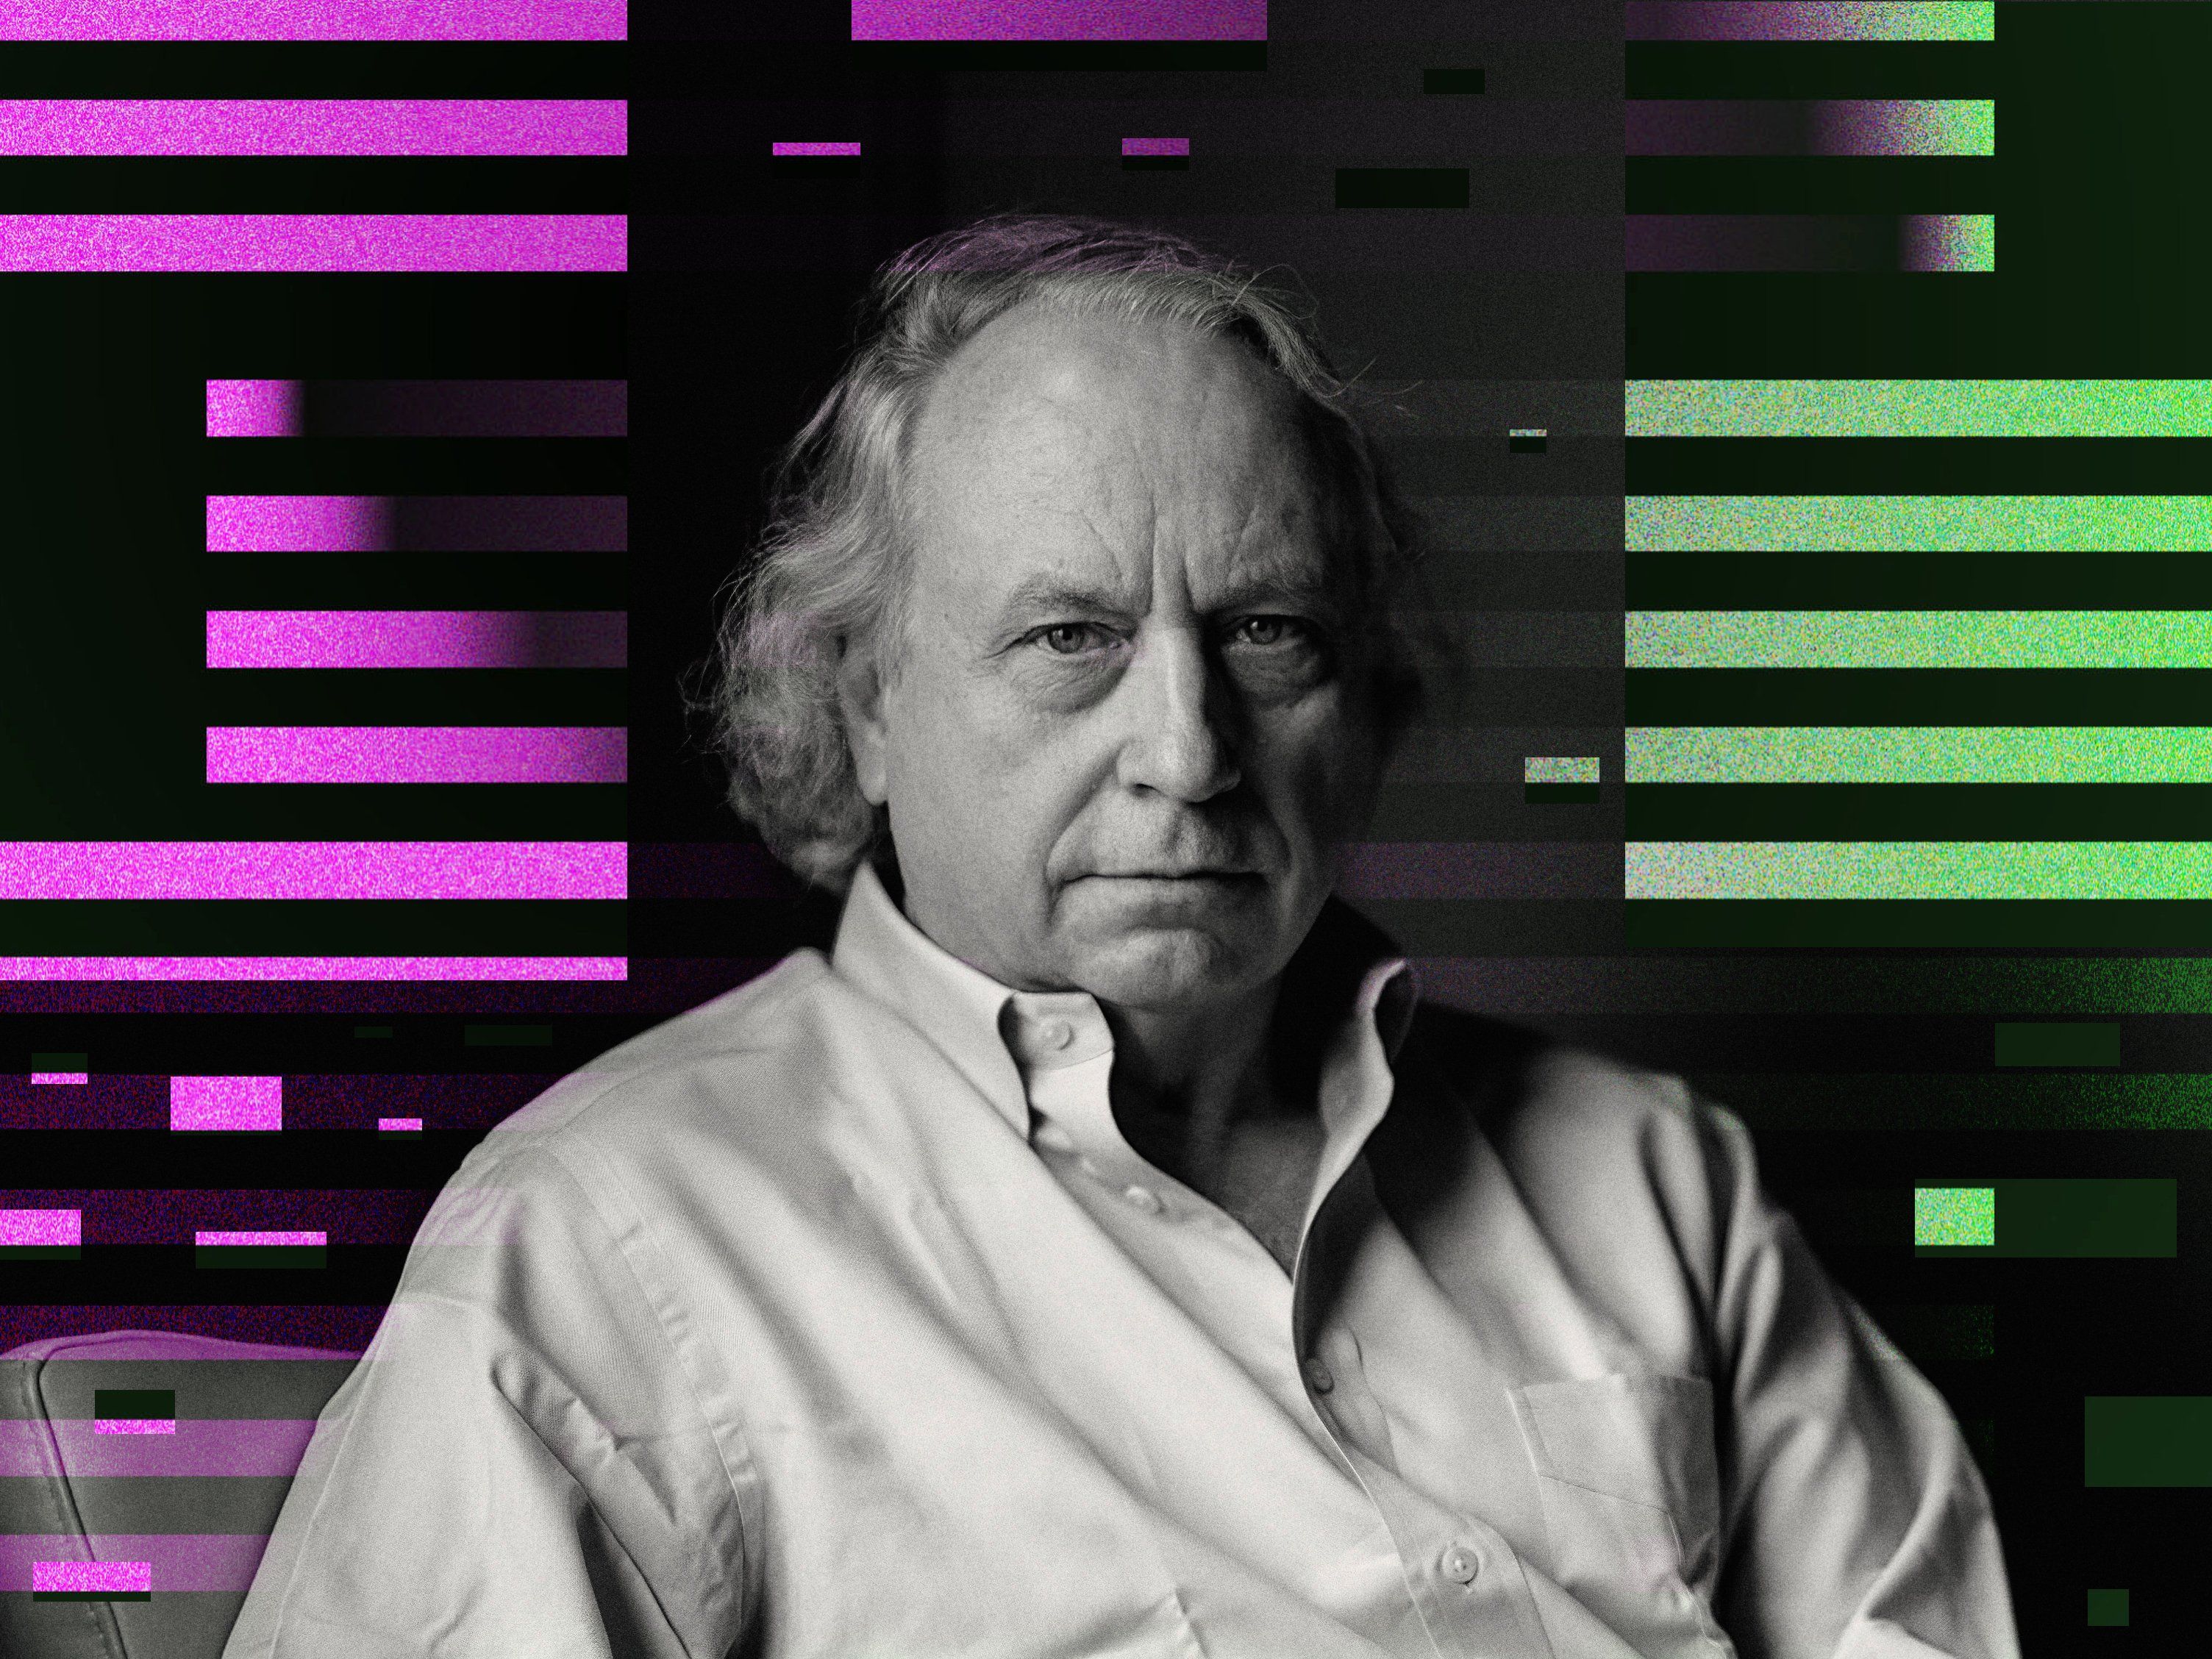 Black and white portait of a man in front of a pink and green lined background